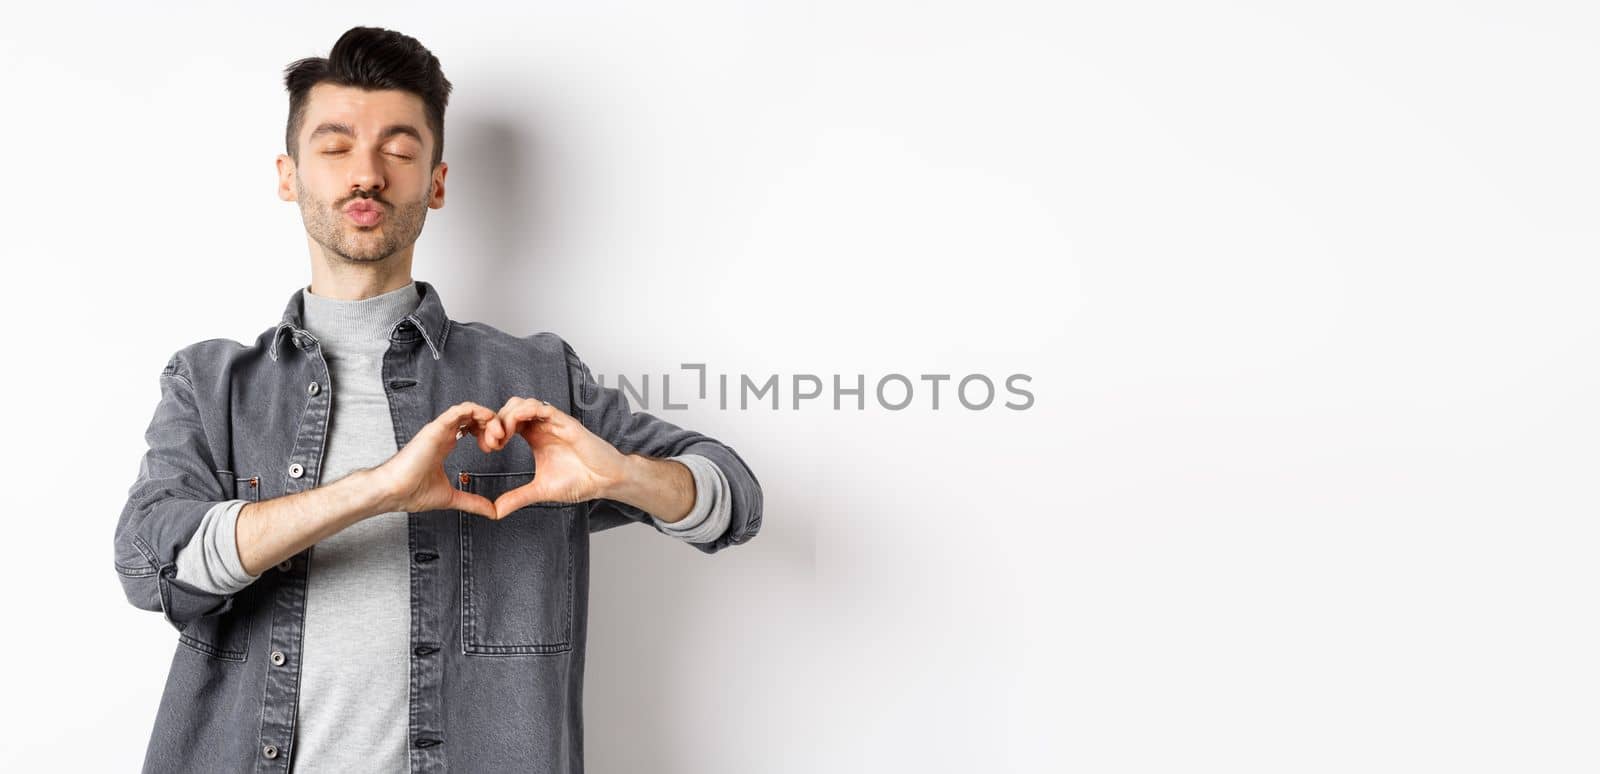 Cute young man waiting for kiss and showing heart gesture, confess on Valentines day, I love you sign, standing against white background.